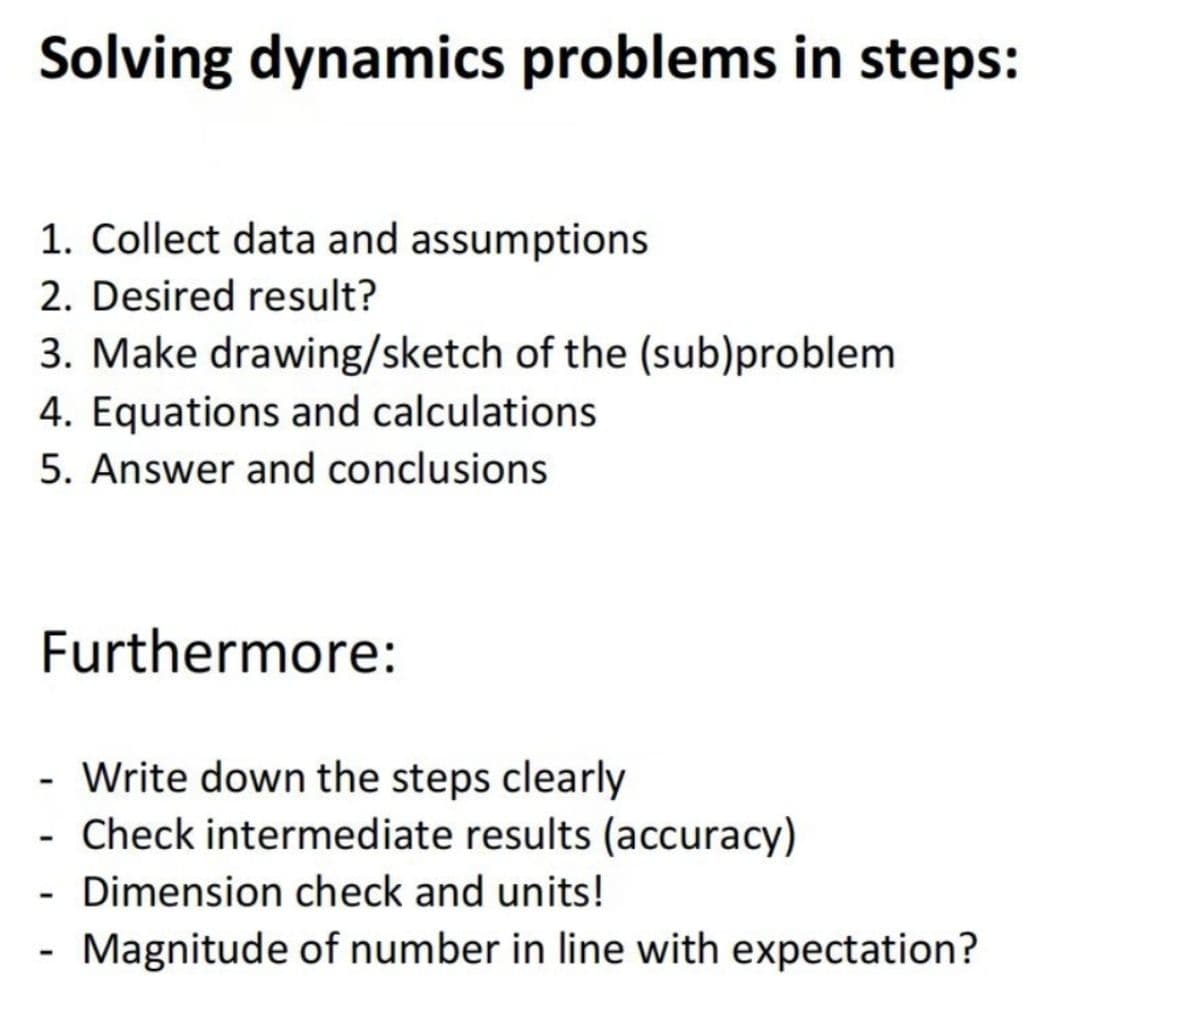 Solving dynamics problems in steps:
1. Collect data and assumptions
2. Desired result?
3. Make drawing/sketch of the (sub)problem
4. Equations and calculations
5. Answer and conclusions
Furthermore:
- Write down the steps clearly
Check intermediate results (accuracy)
Dimension check and units!
Magnitude of number in line with expectation?